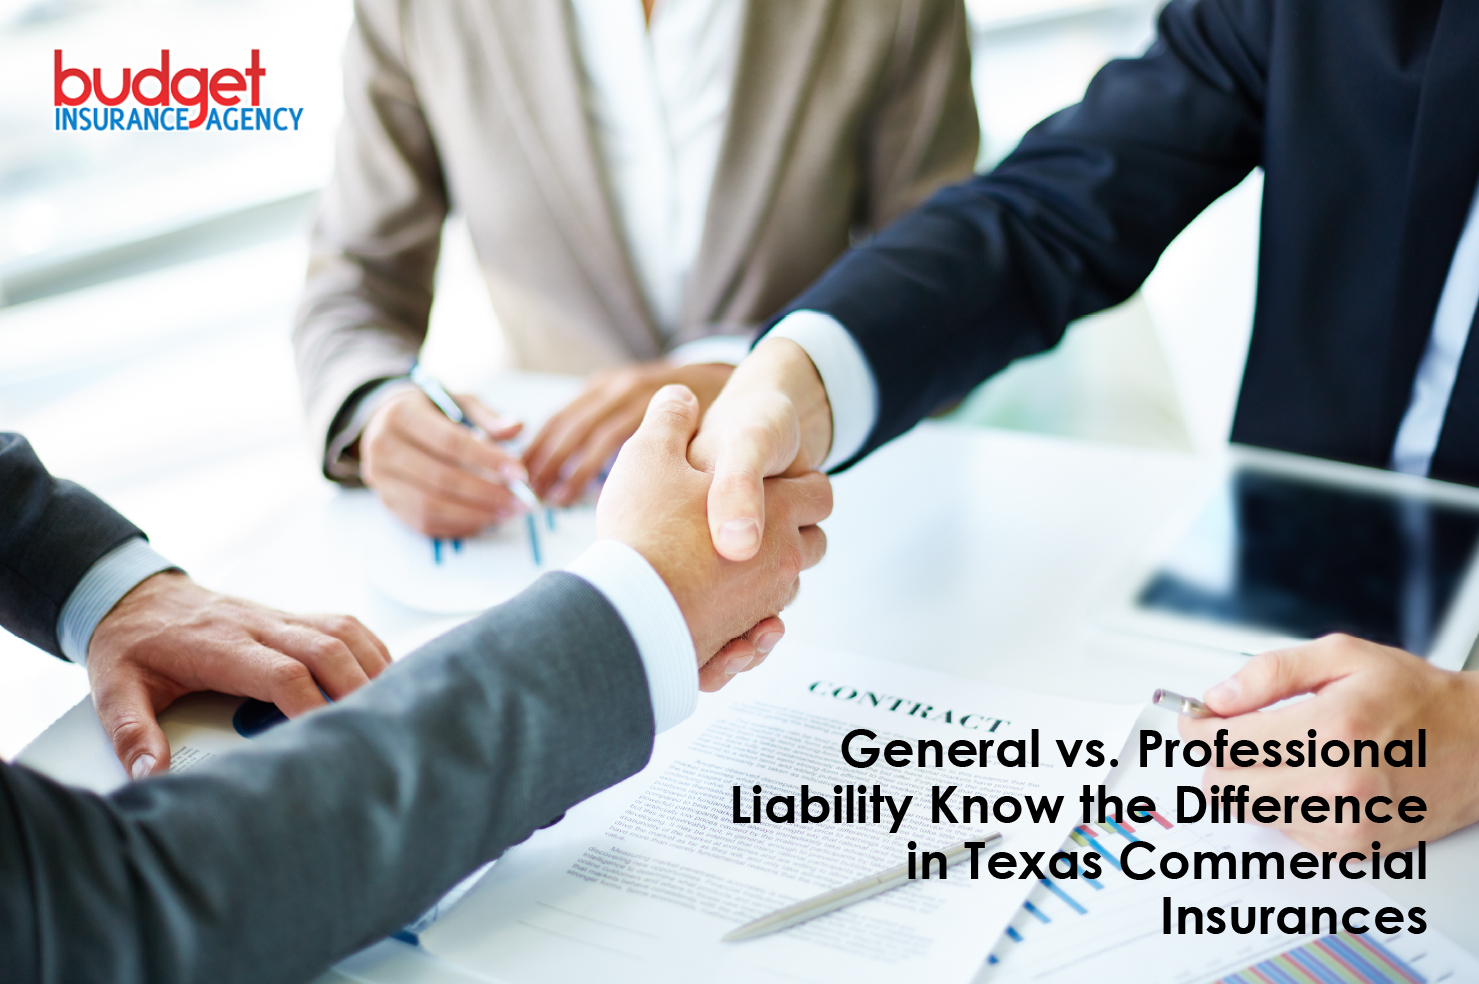 General vs. Professional Liability: Know the Difference in Texas Commercial Insurances